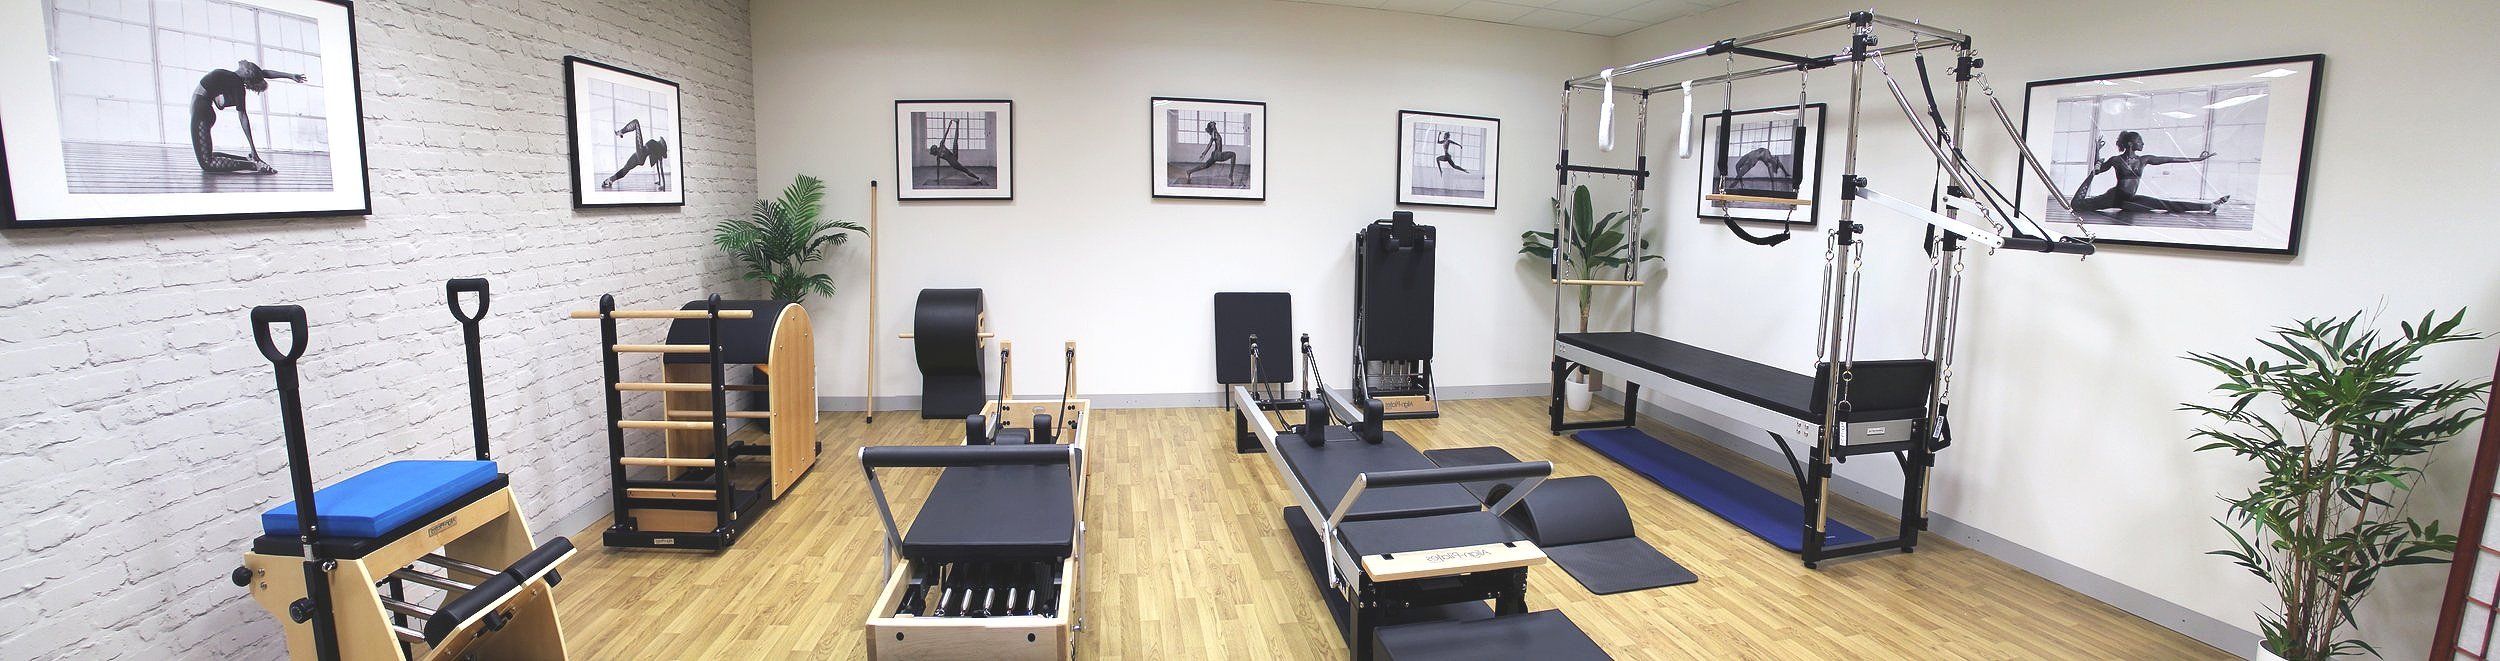 Pilates reformer reviews for studio start up, Pilates reformer price,  performance and for sale — Pilates Consultant